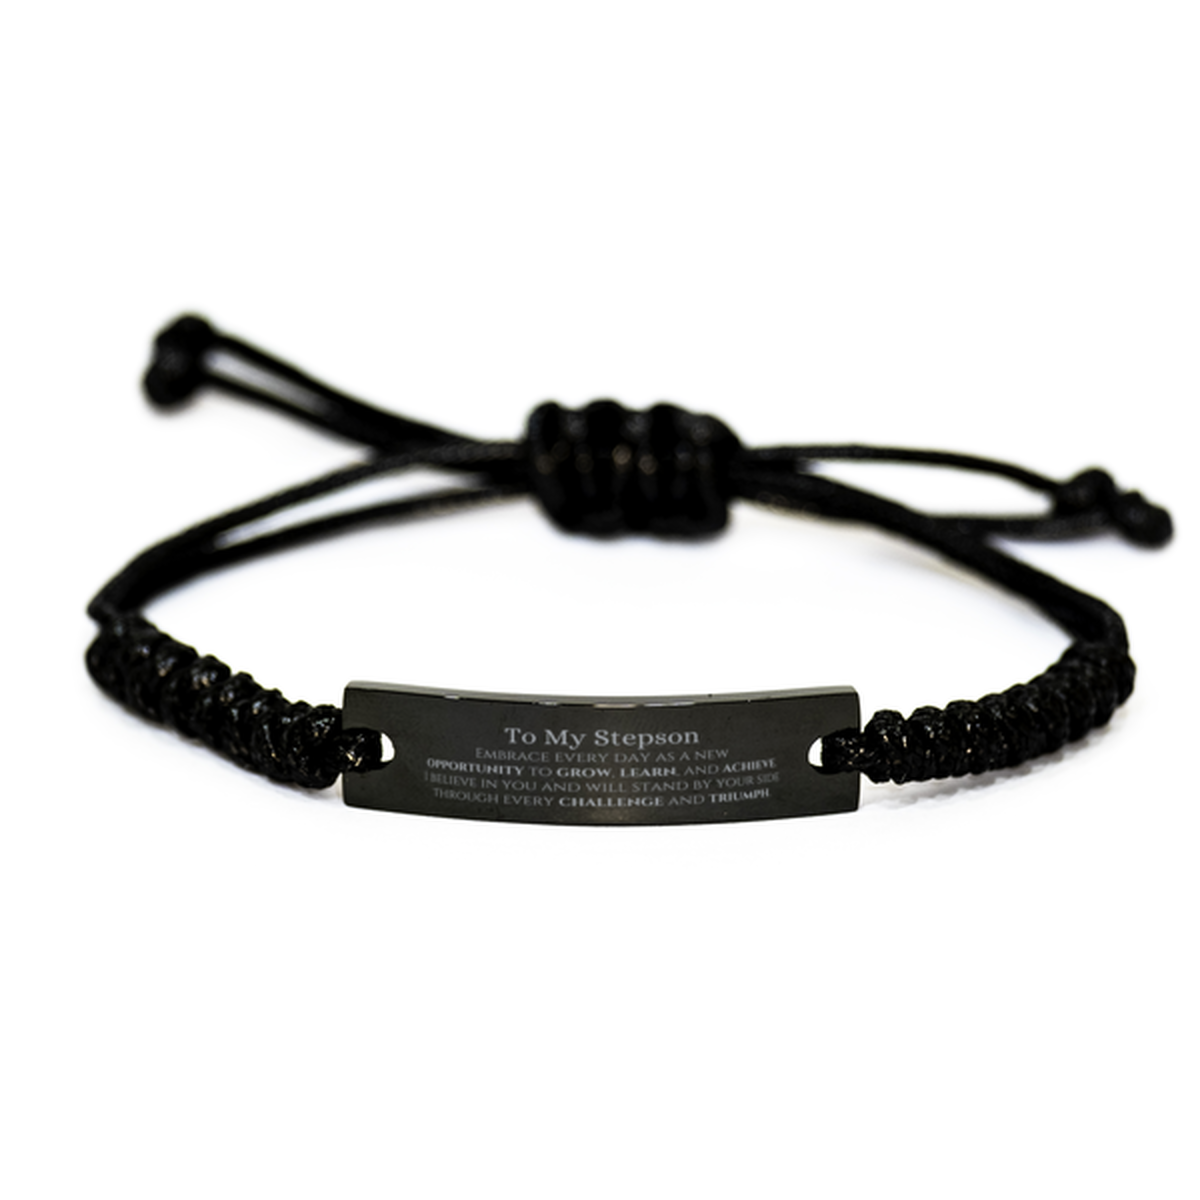 To My Stepson Gifts, I believe in you and will stand by your side, Inspirational Black Rope Bracelet For Stepson, Birthday Christmas Motivational Stepson Gifts